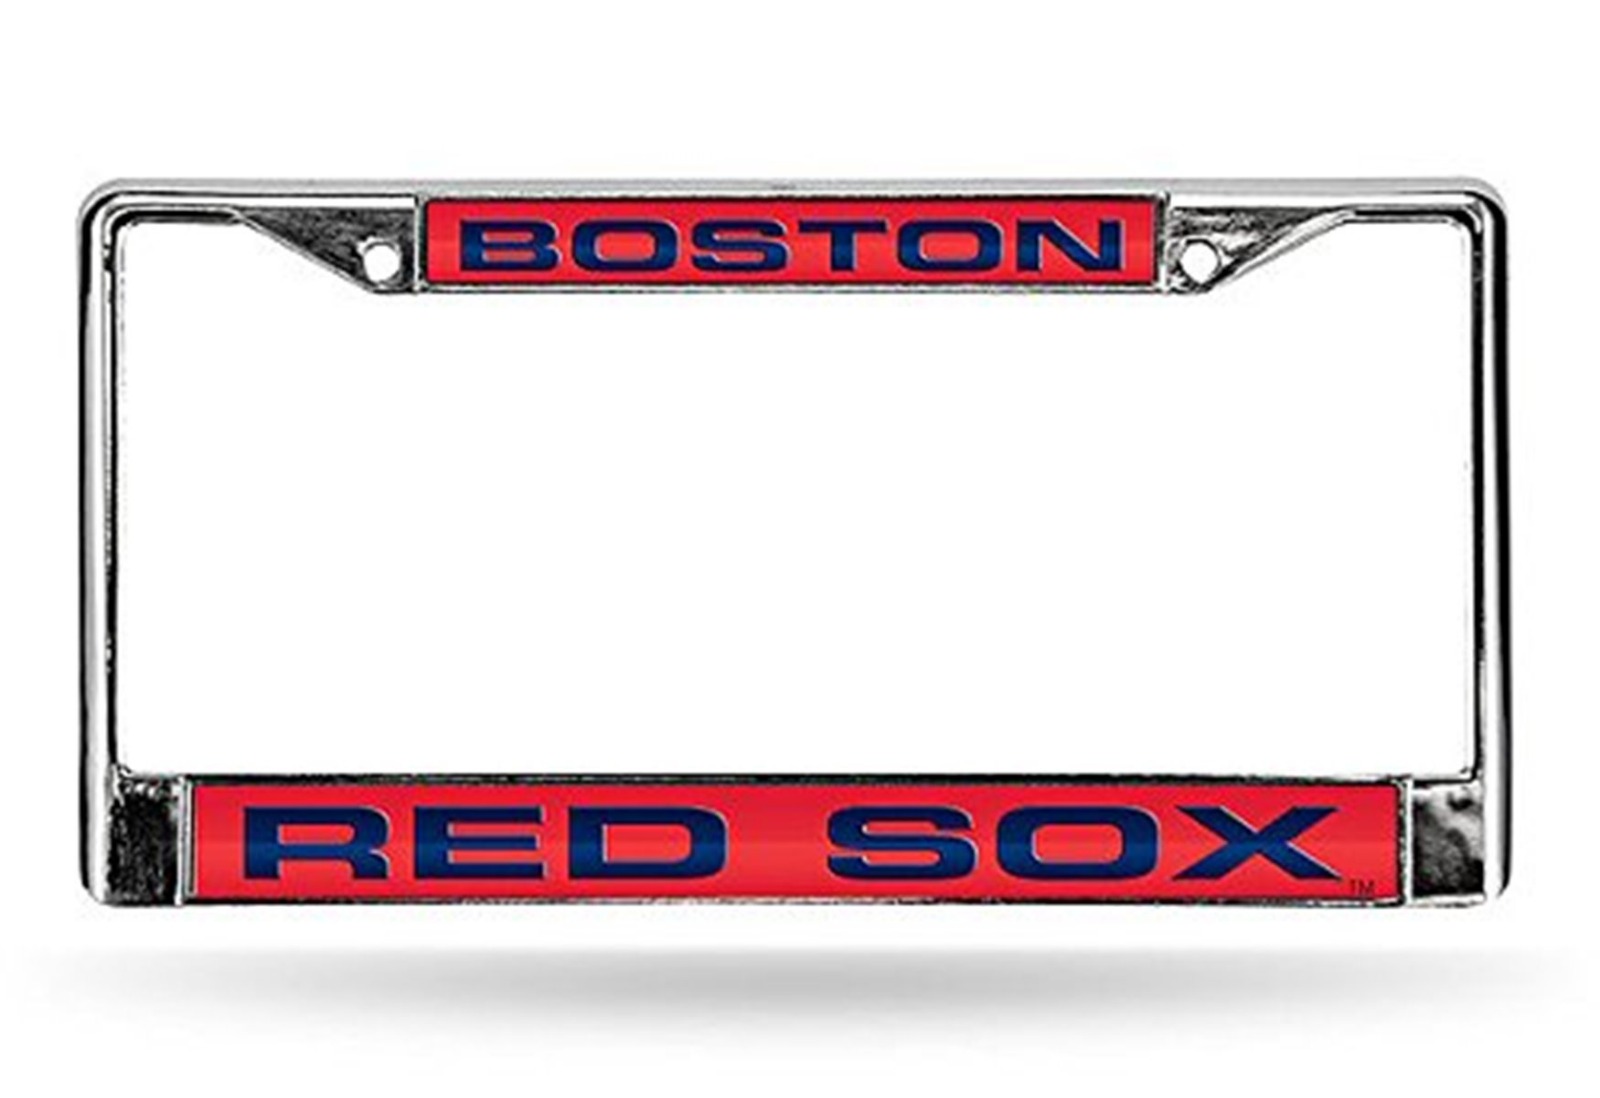 Boston Red Sox PV LASER FRAME Chrome Metal License Plate Tag Cover ...